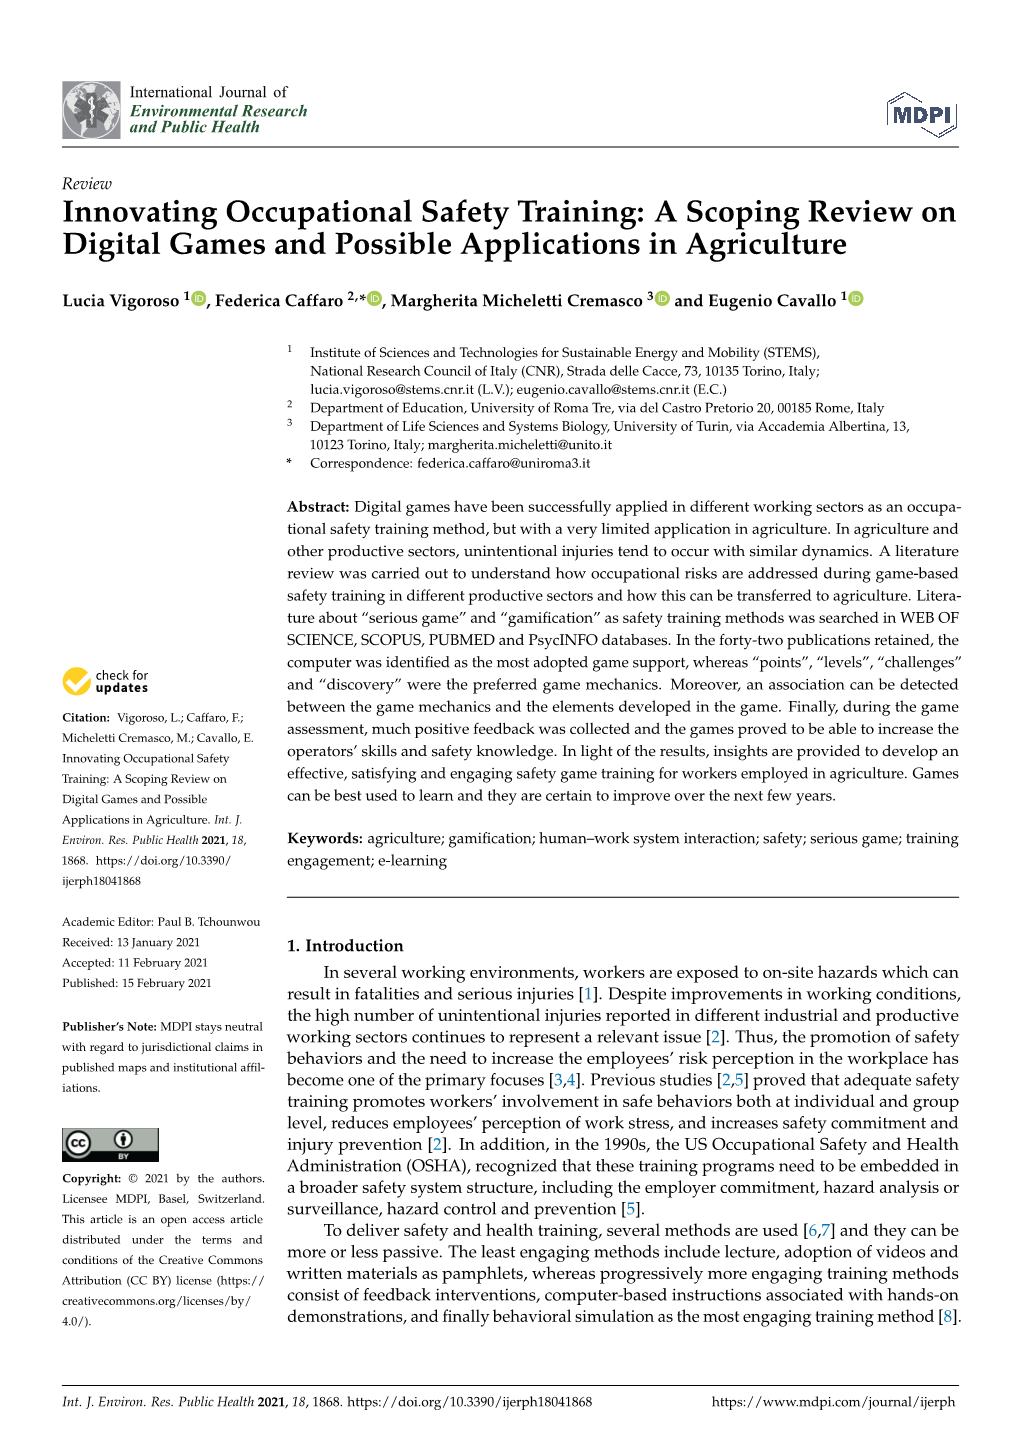 Innovating Occupational Safety Training: a Scoping Review on Digital Games and Possible Applications in Agriculture